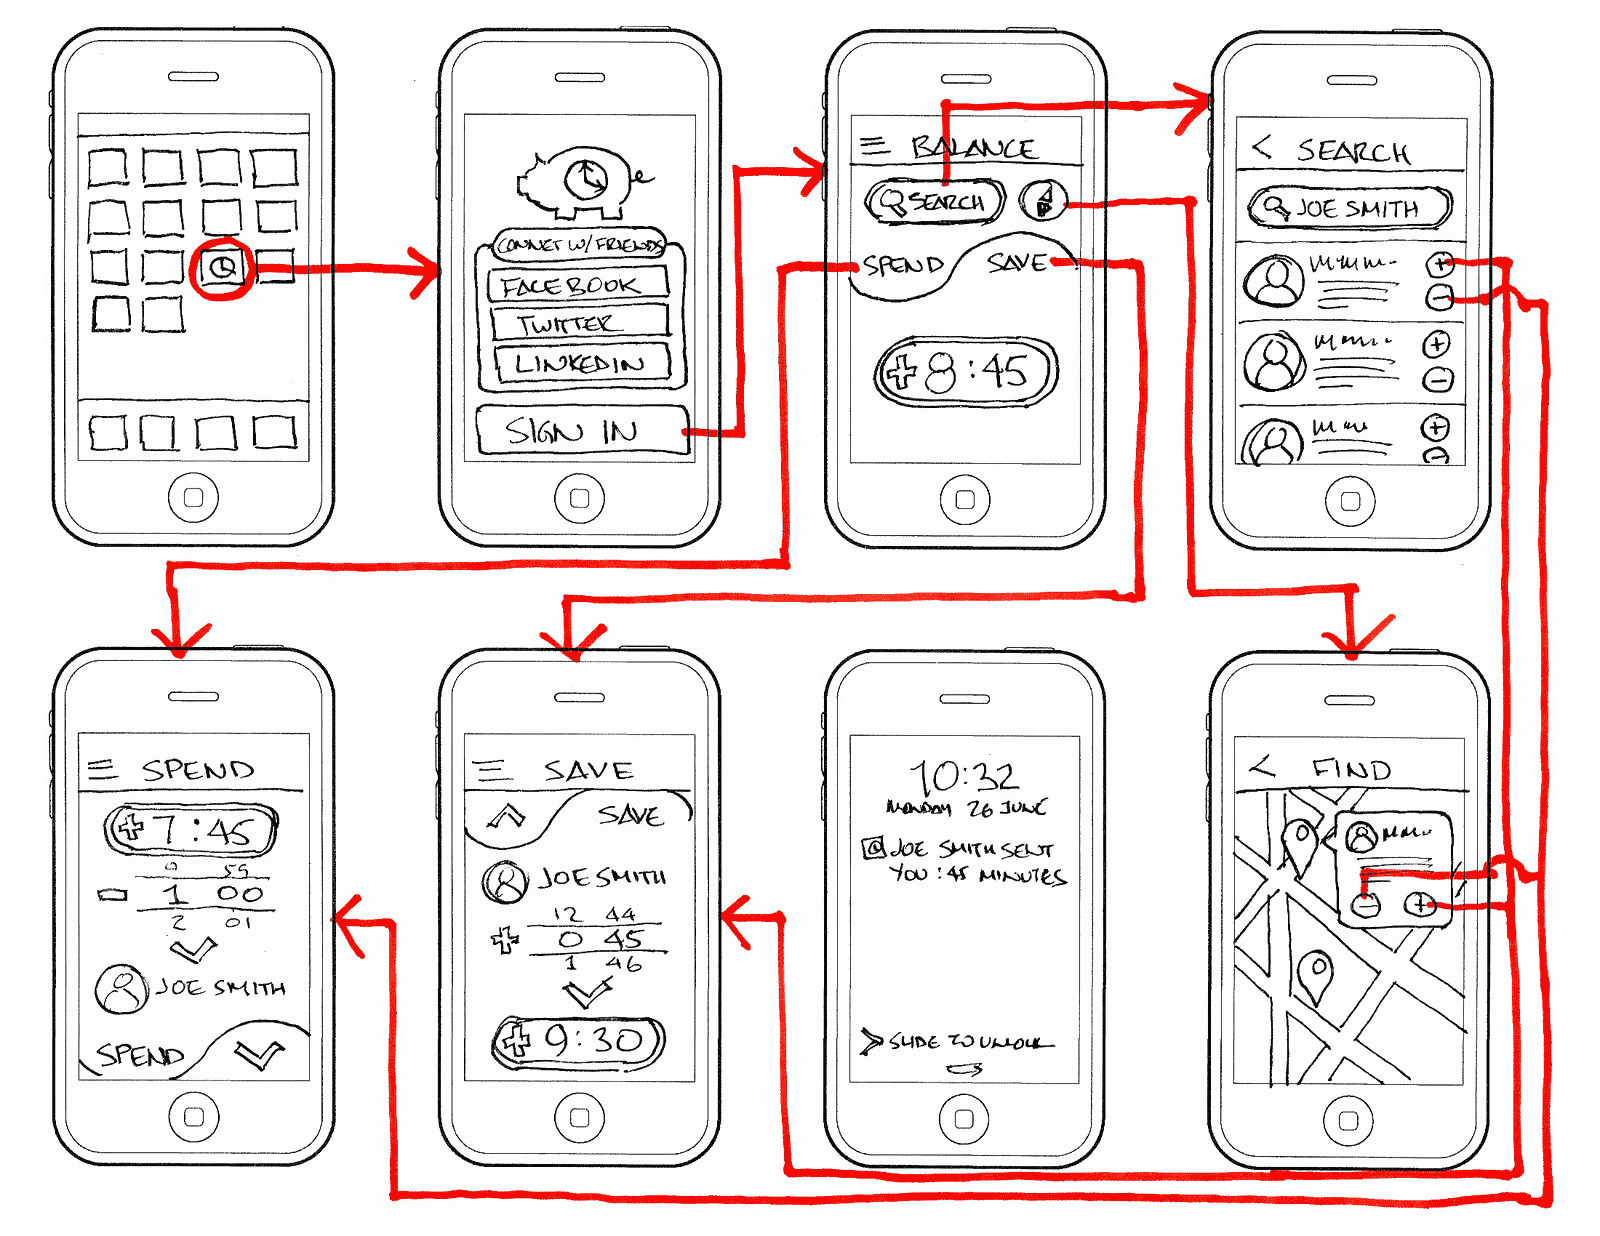 A diagram showing various hand-drawn outlines for a mobile device user interface